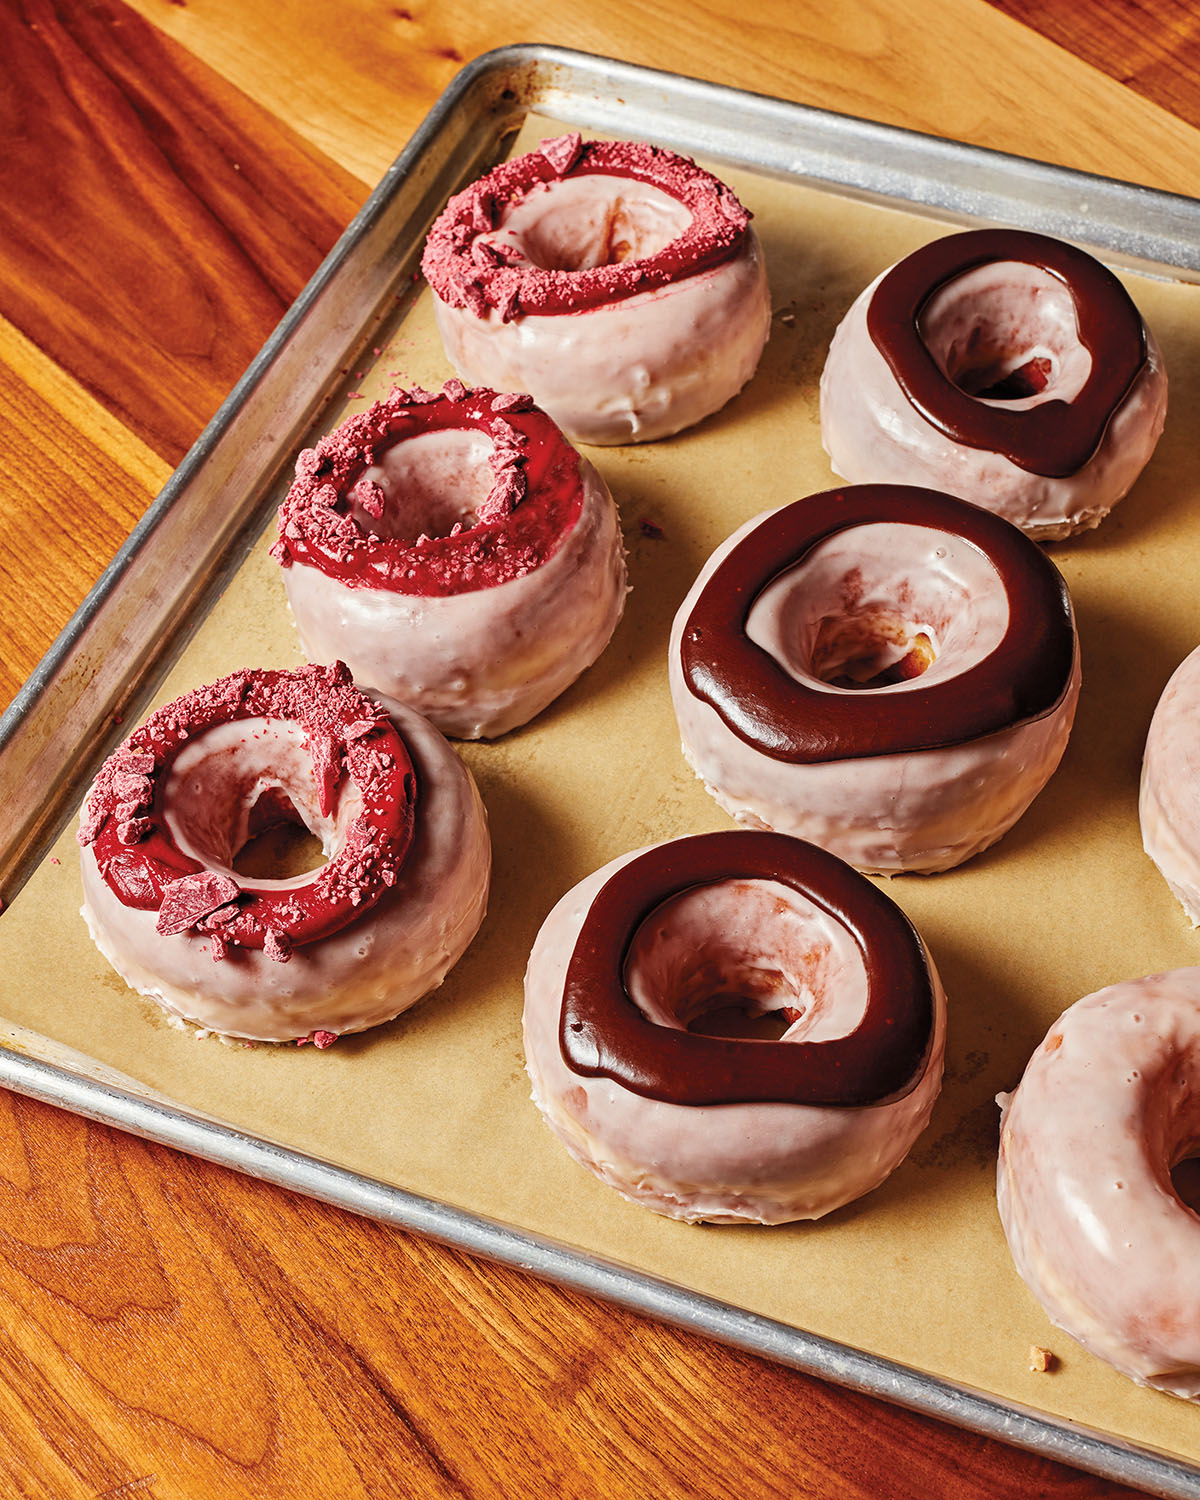 Bright pink donuts topped with pink and chocolate frosting